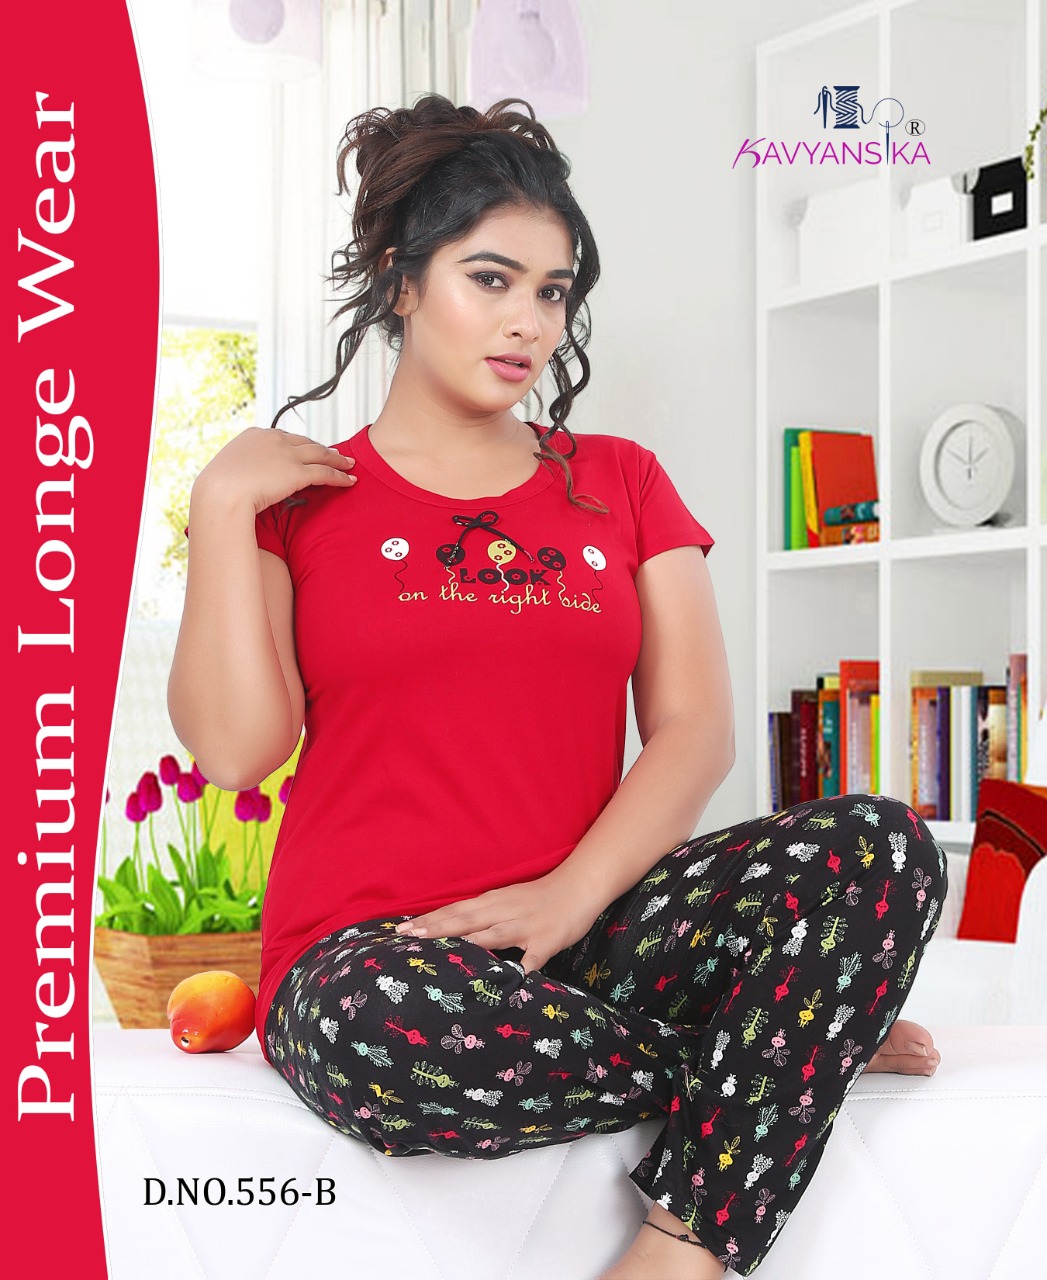 Kavyansika Grand Vol 556 Hosiery Cotton Exclusive Night Suit At Affordable Price